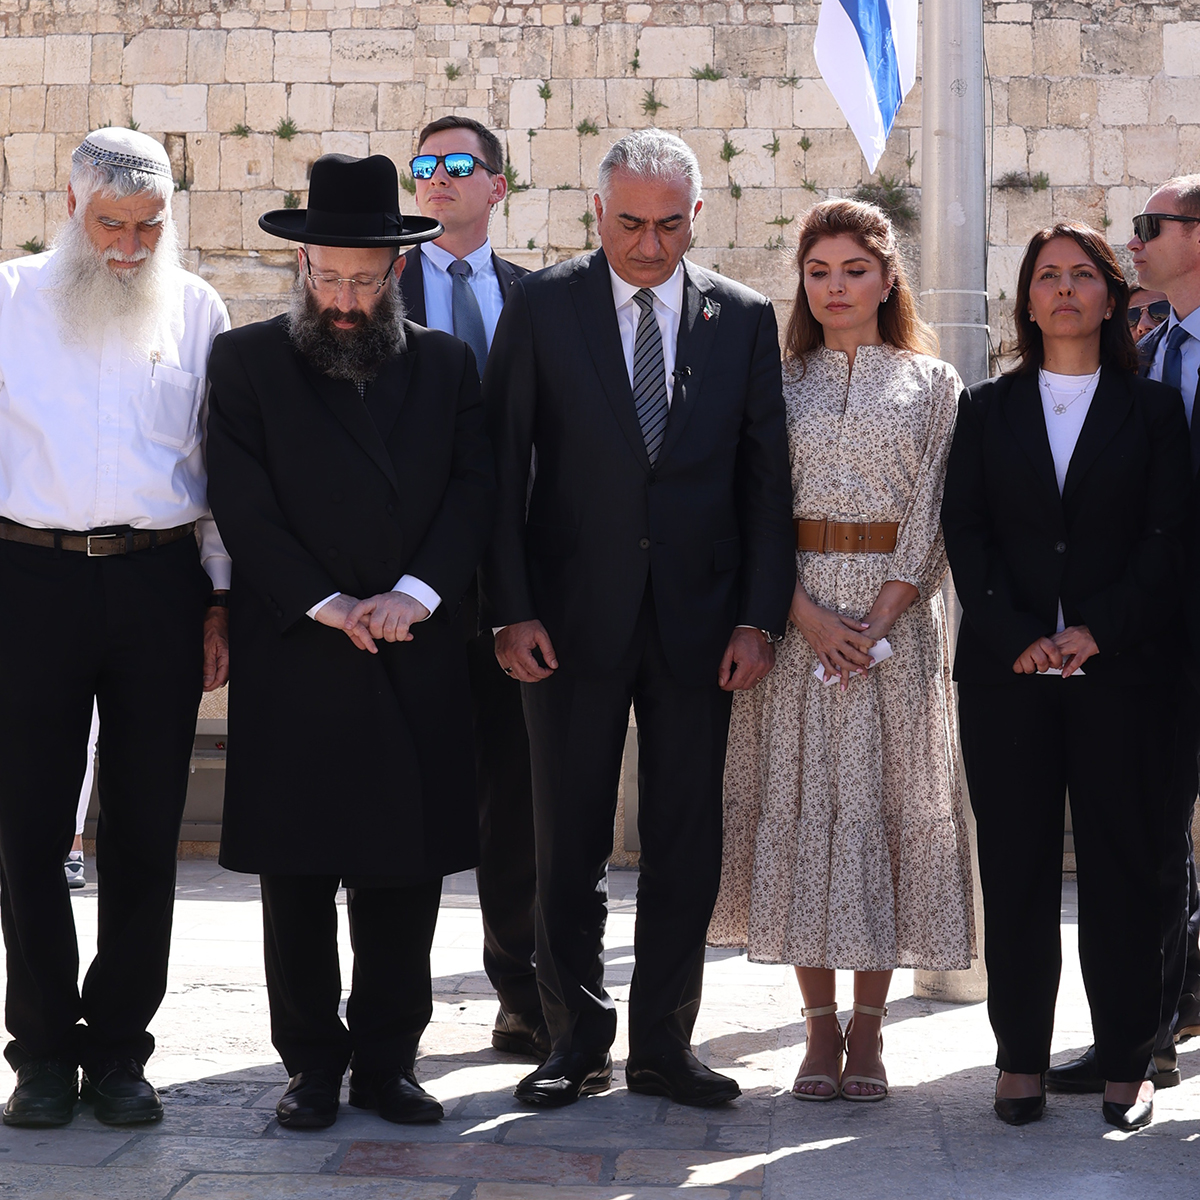 A year ago, on Israel's Holocaust Remembrance Day #YomHaShoah, Iran's Crown Prince @PahlaviReza and Princess Yasmine Pahlavi stood at the Western Wall plaza in Jerusalem and bowed their heads in solidarity with all Israelis in mourning 6 million Jewish victims of the Holocaust.